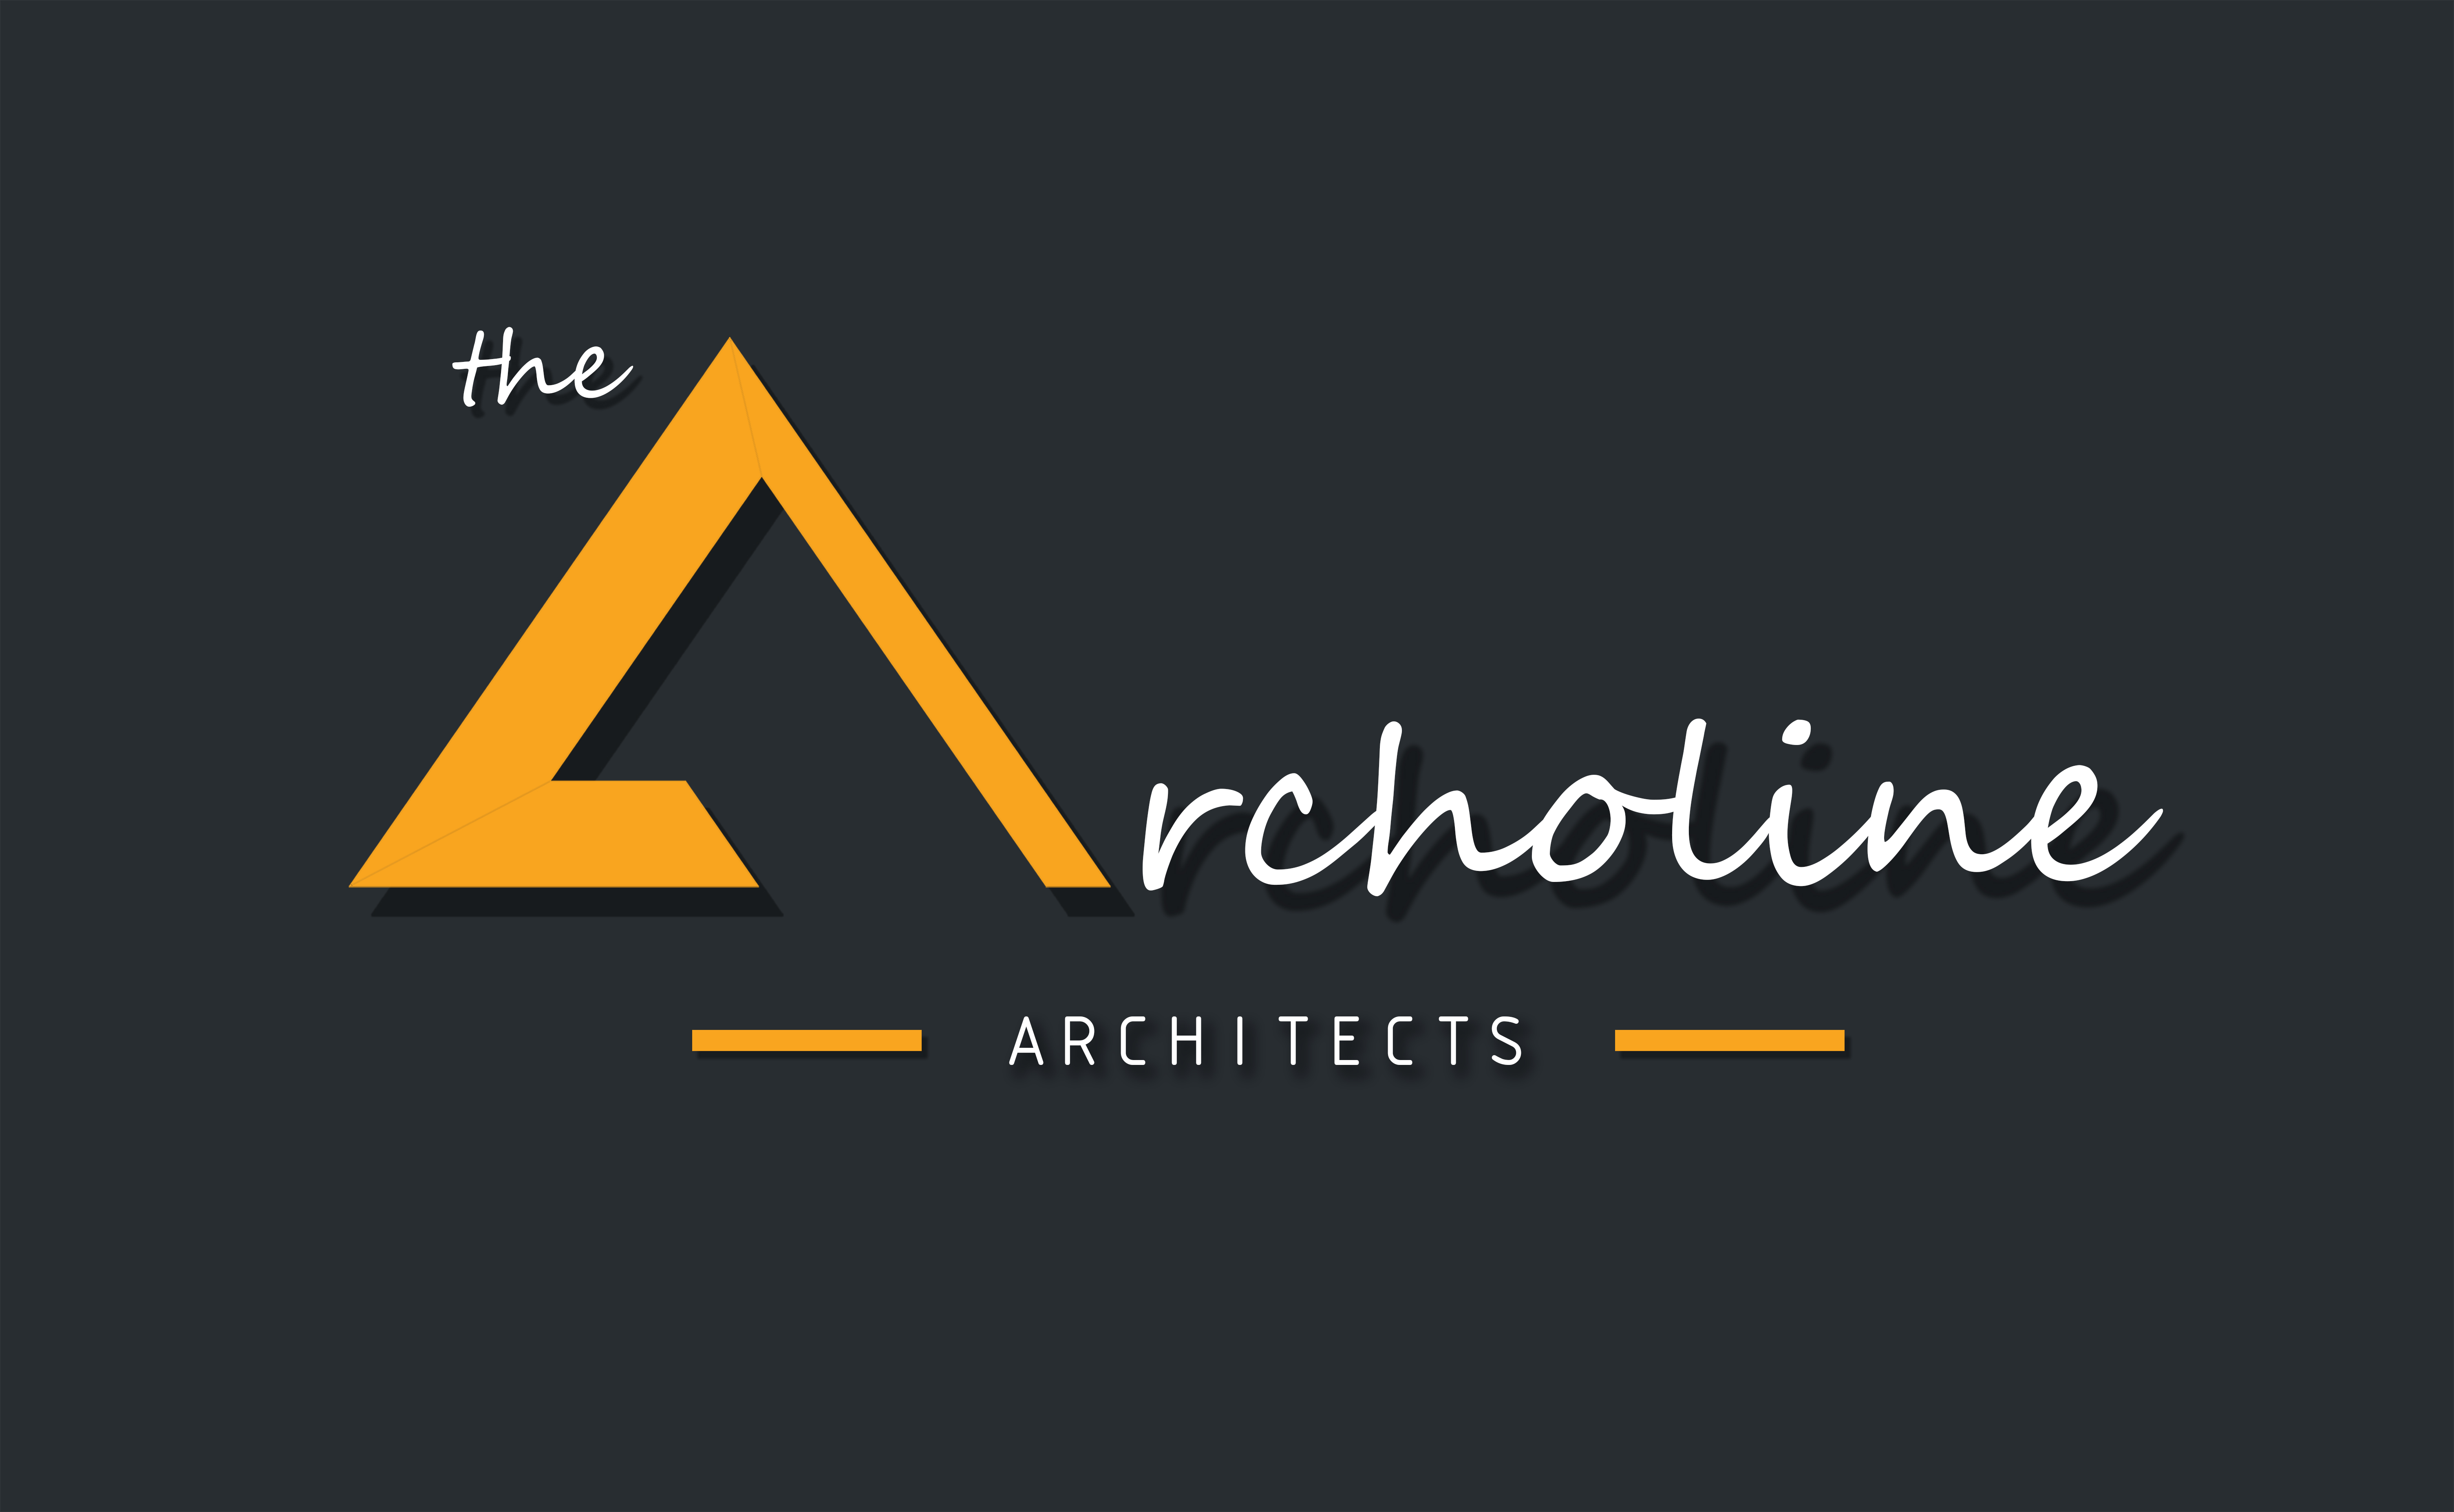 The Archoline Architects|Architect|Professional Services